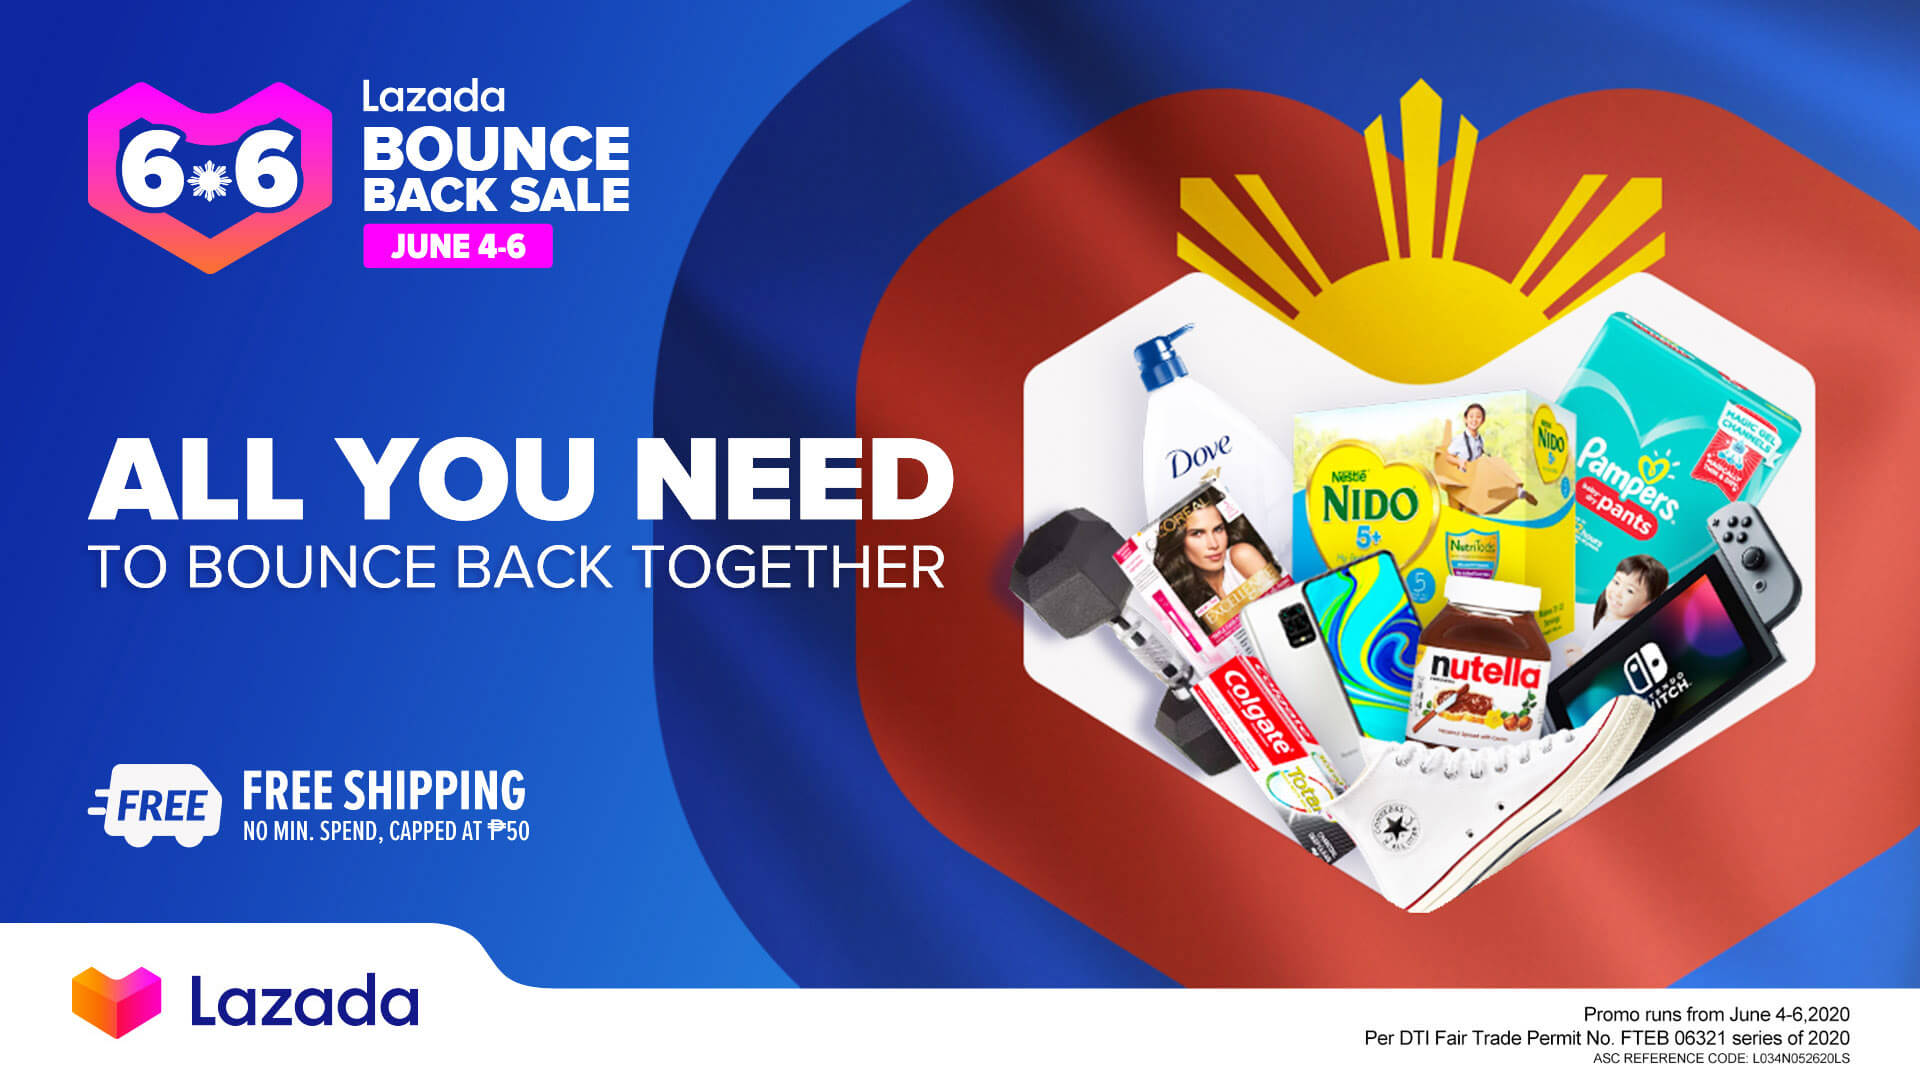 Get Ready for Lazada’s Bounce Back Sale from June 4 to 6!